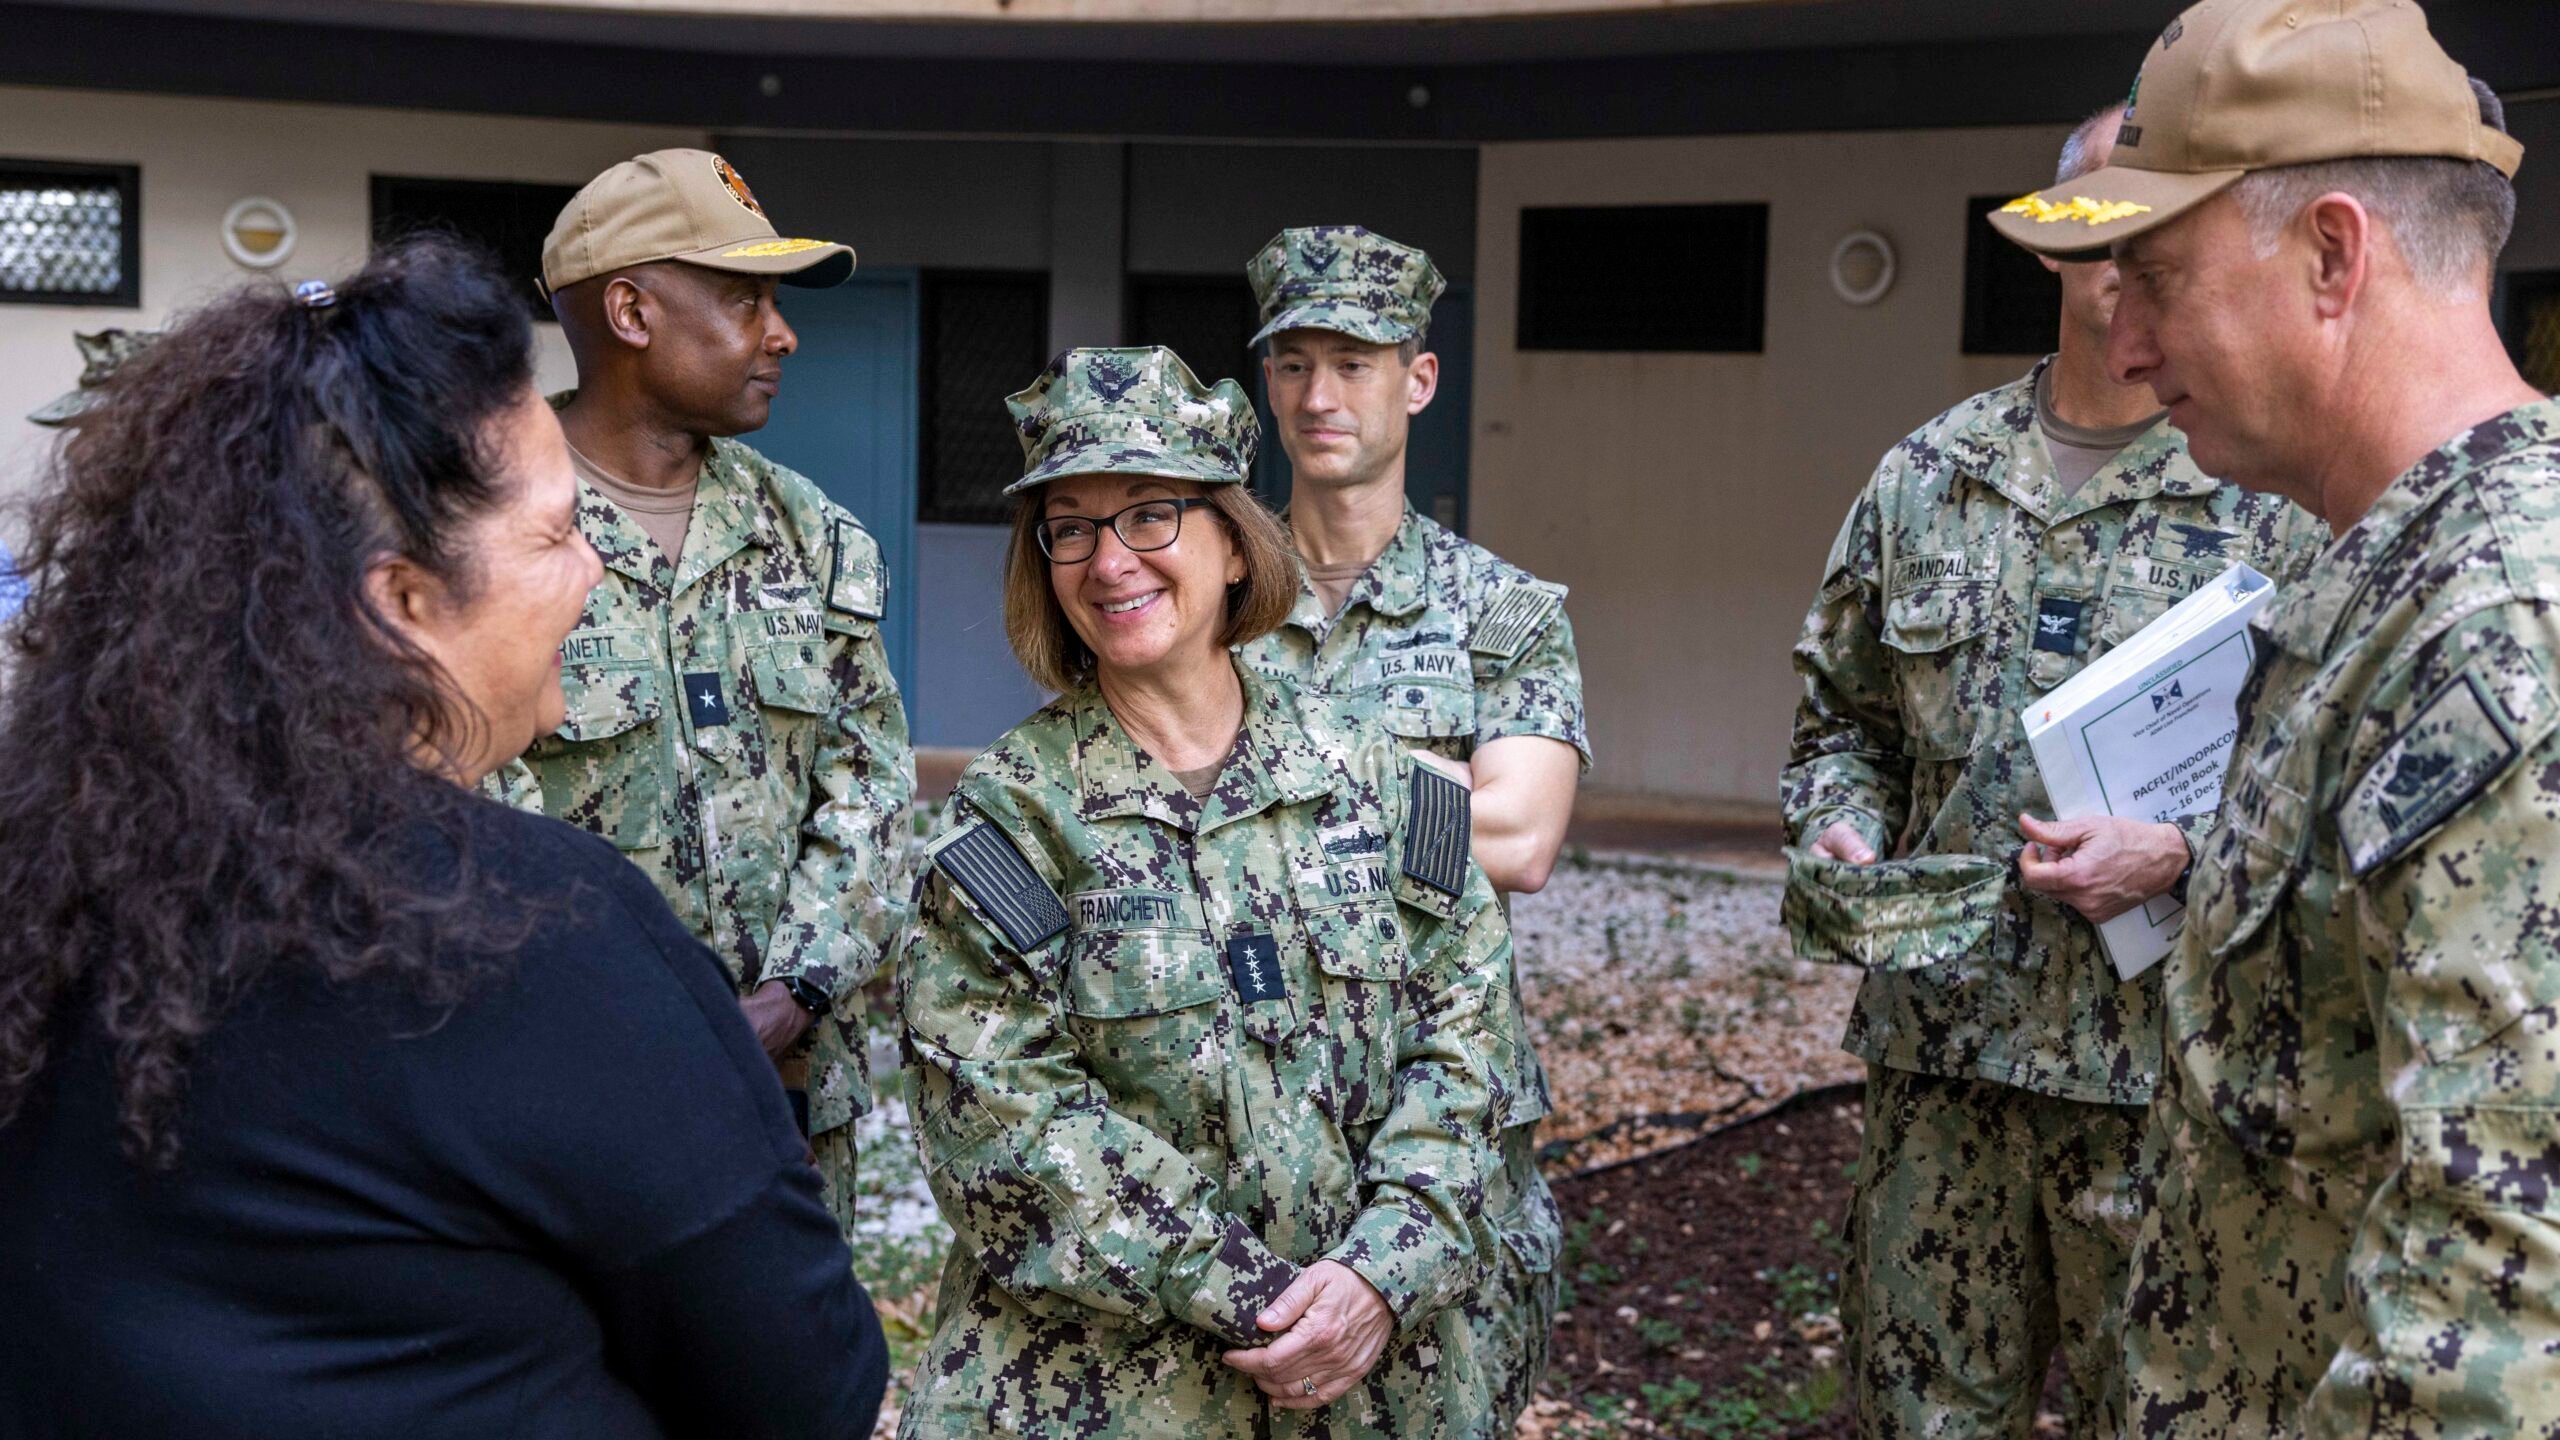 Vice Chief of Naval Operations Tours Sailor’s Housing on Joint Base Pearl Harbor-Hickam